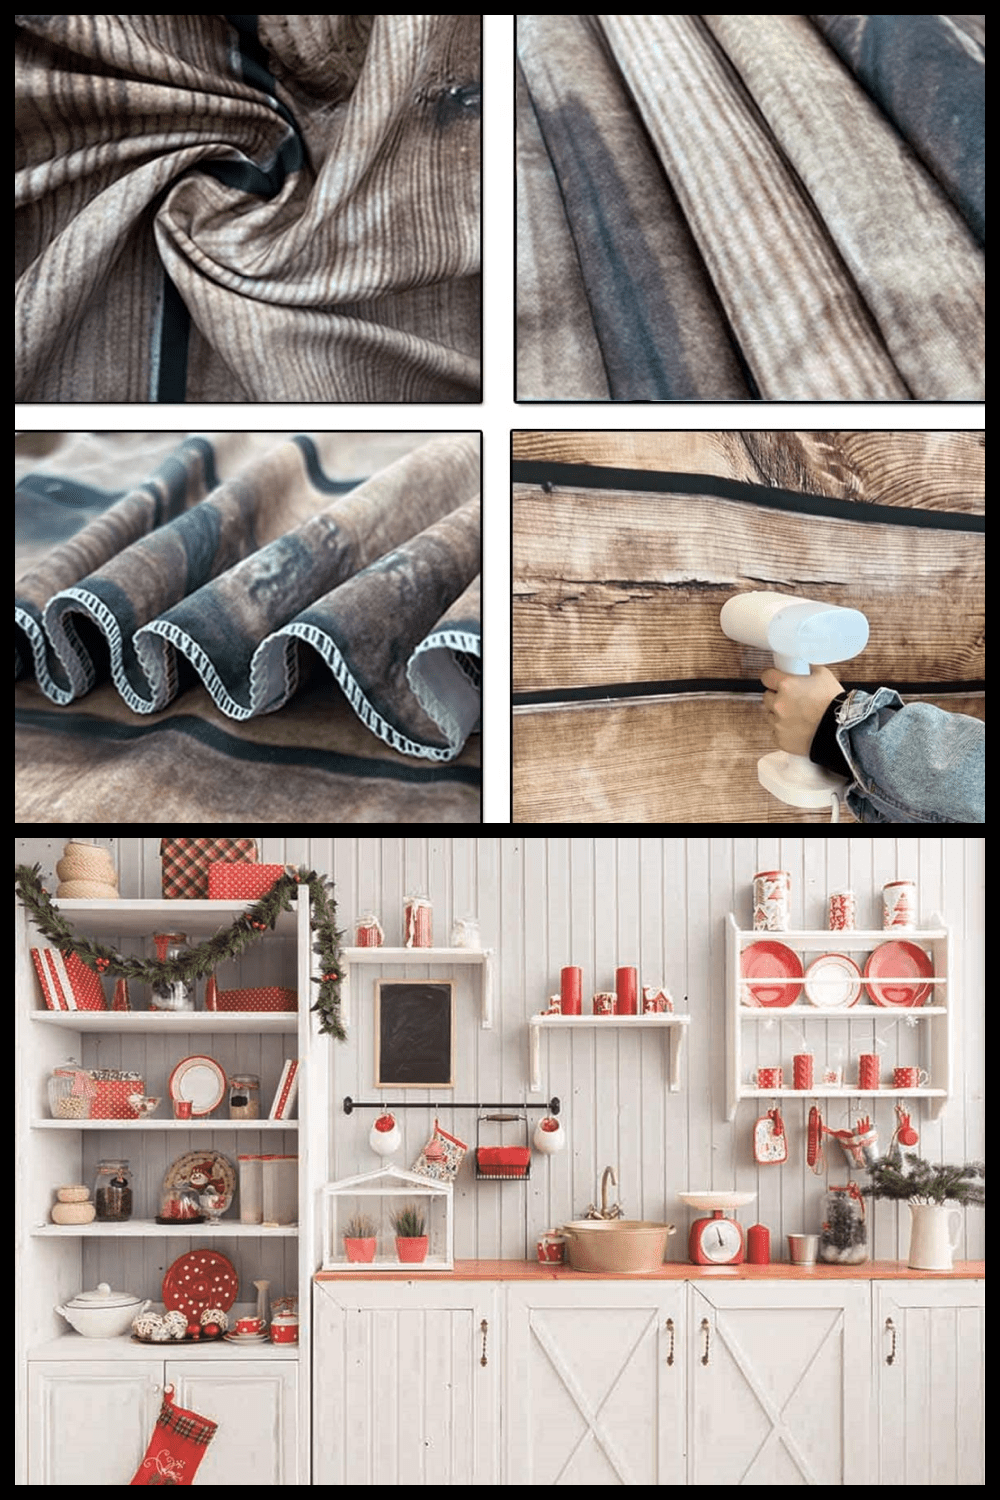 Collage of photos of a white kitchen with red utensils and gray curtains.